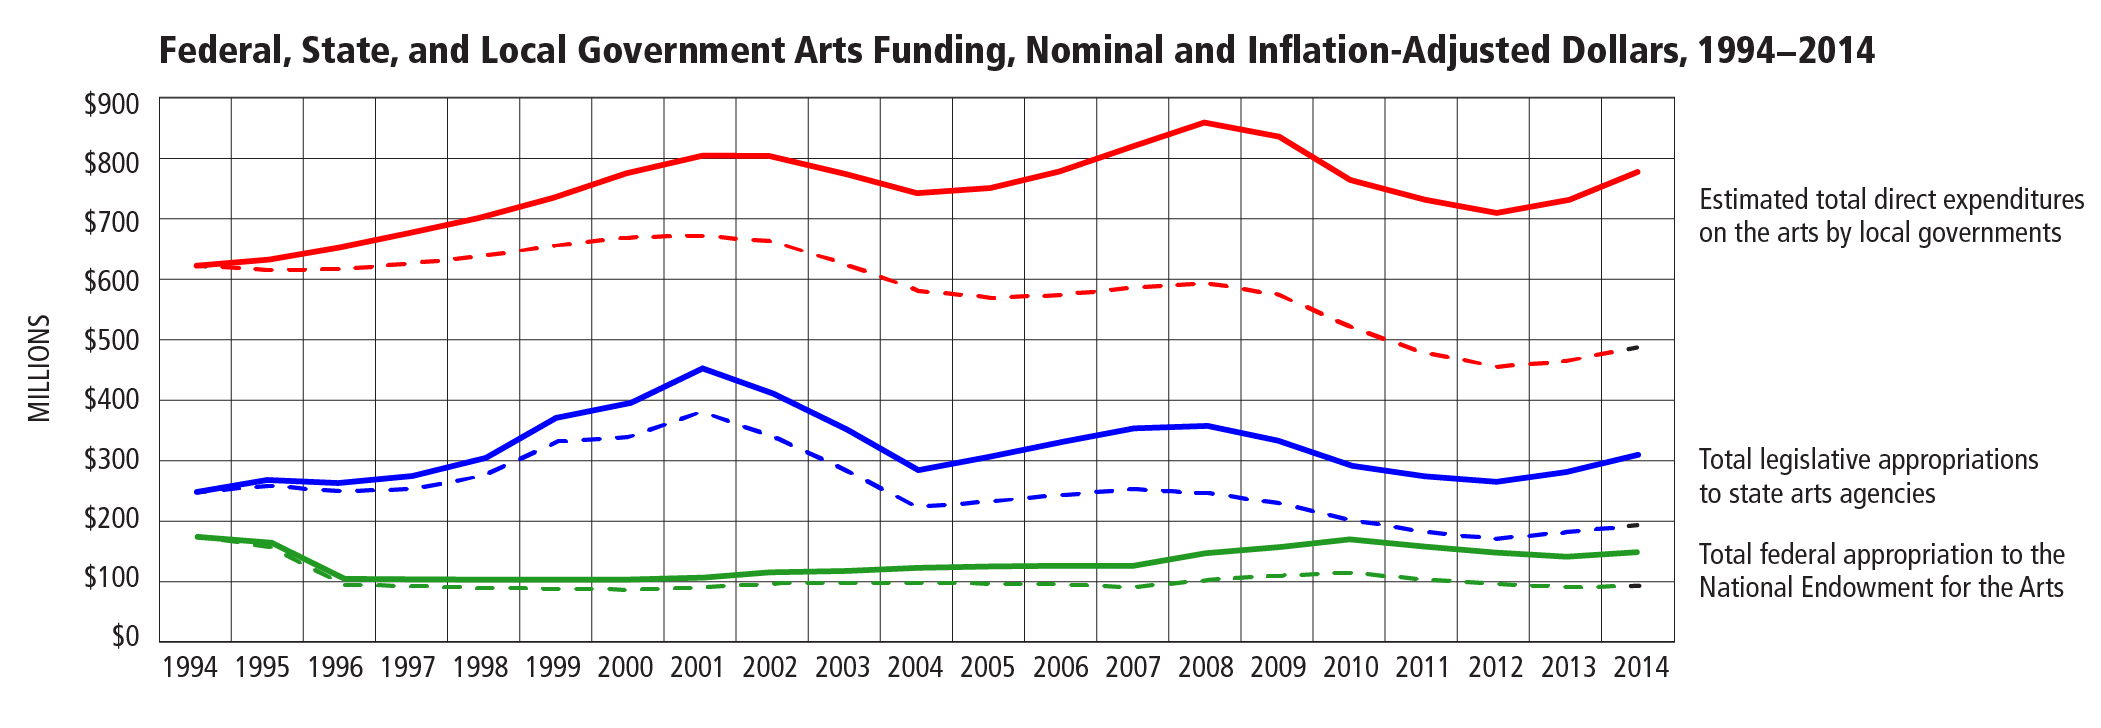 Federal, State, and Local Government Arts Funding, Nominal and Inflation-Adjusted Dollars, 1994−2014